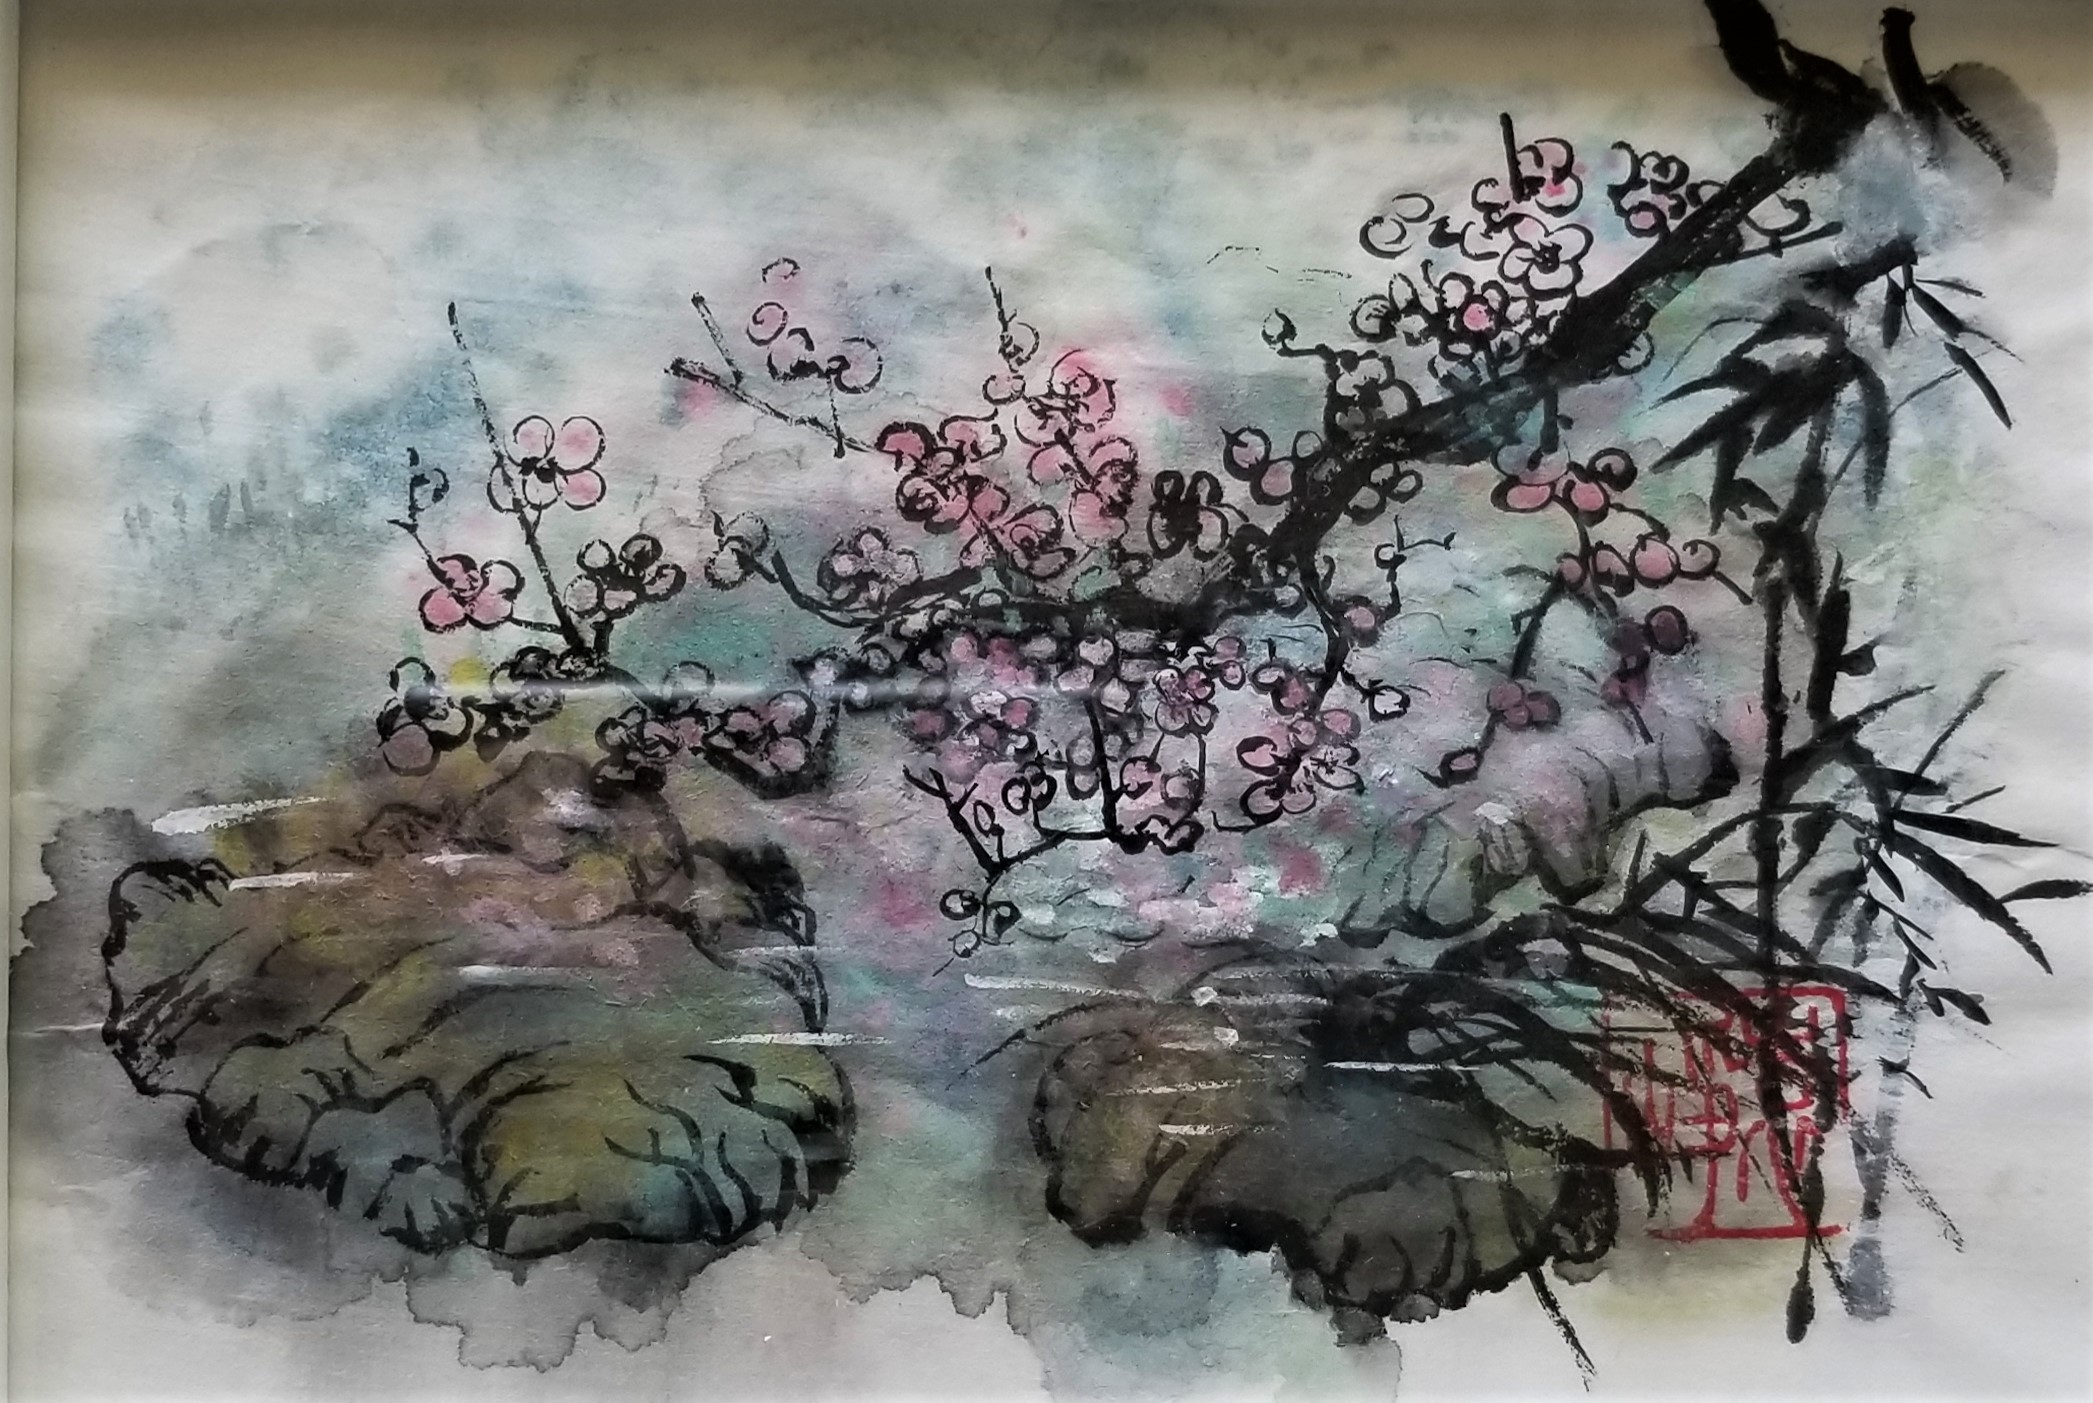 Plum Flowers and Bamboos 溪石梅竹